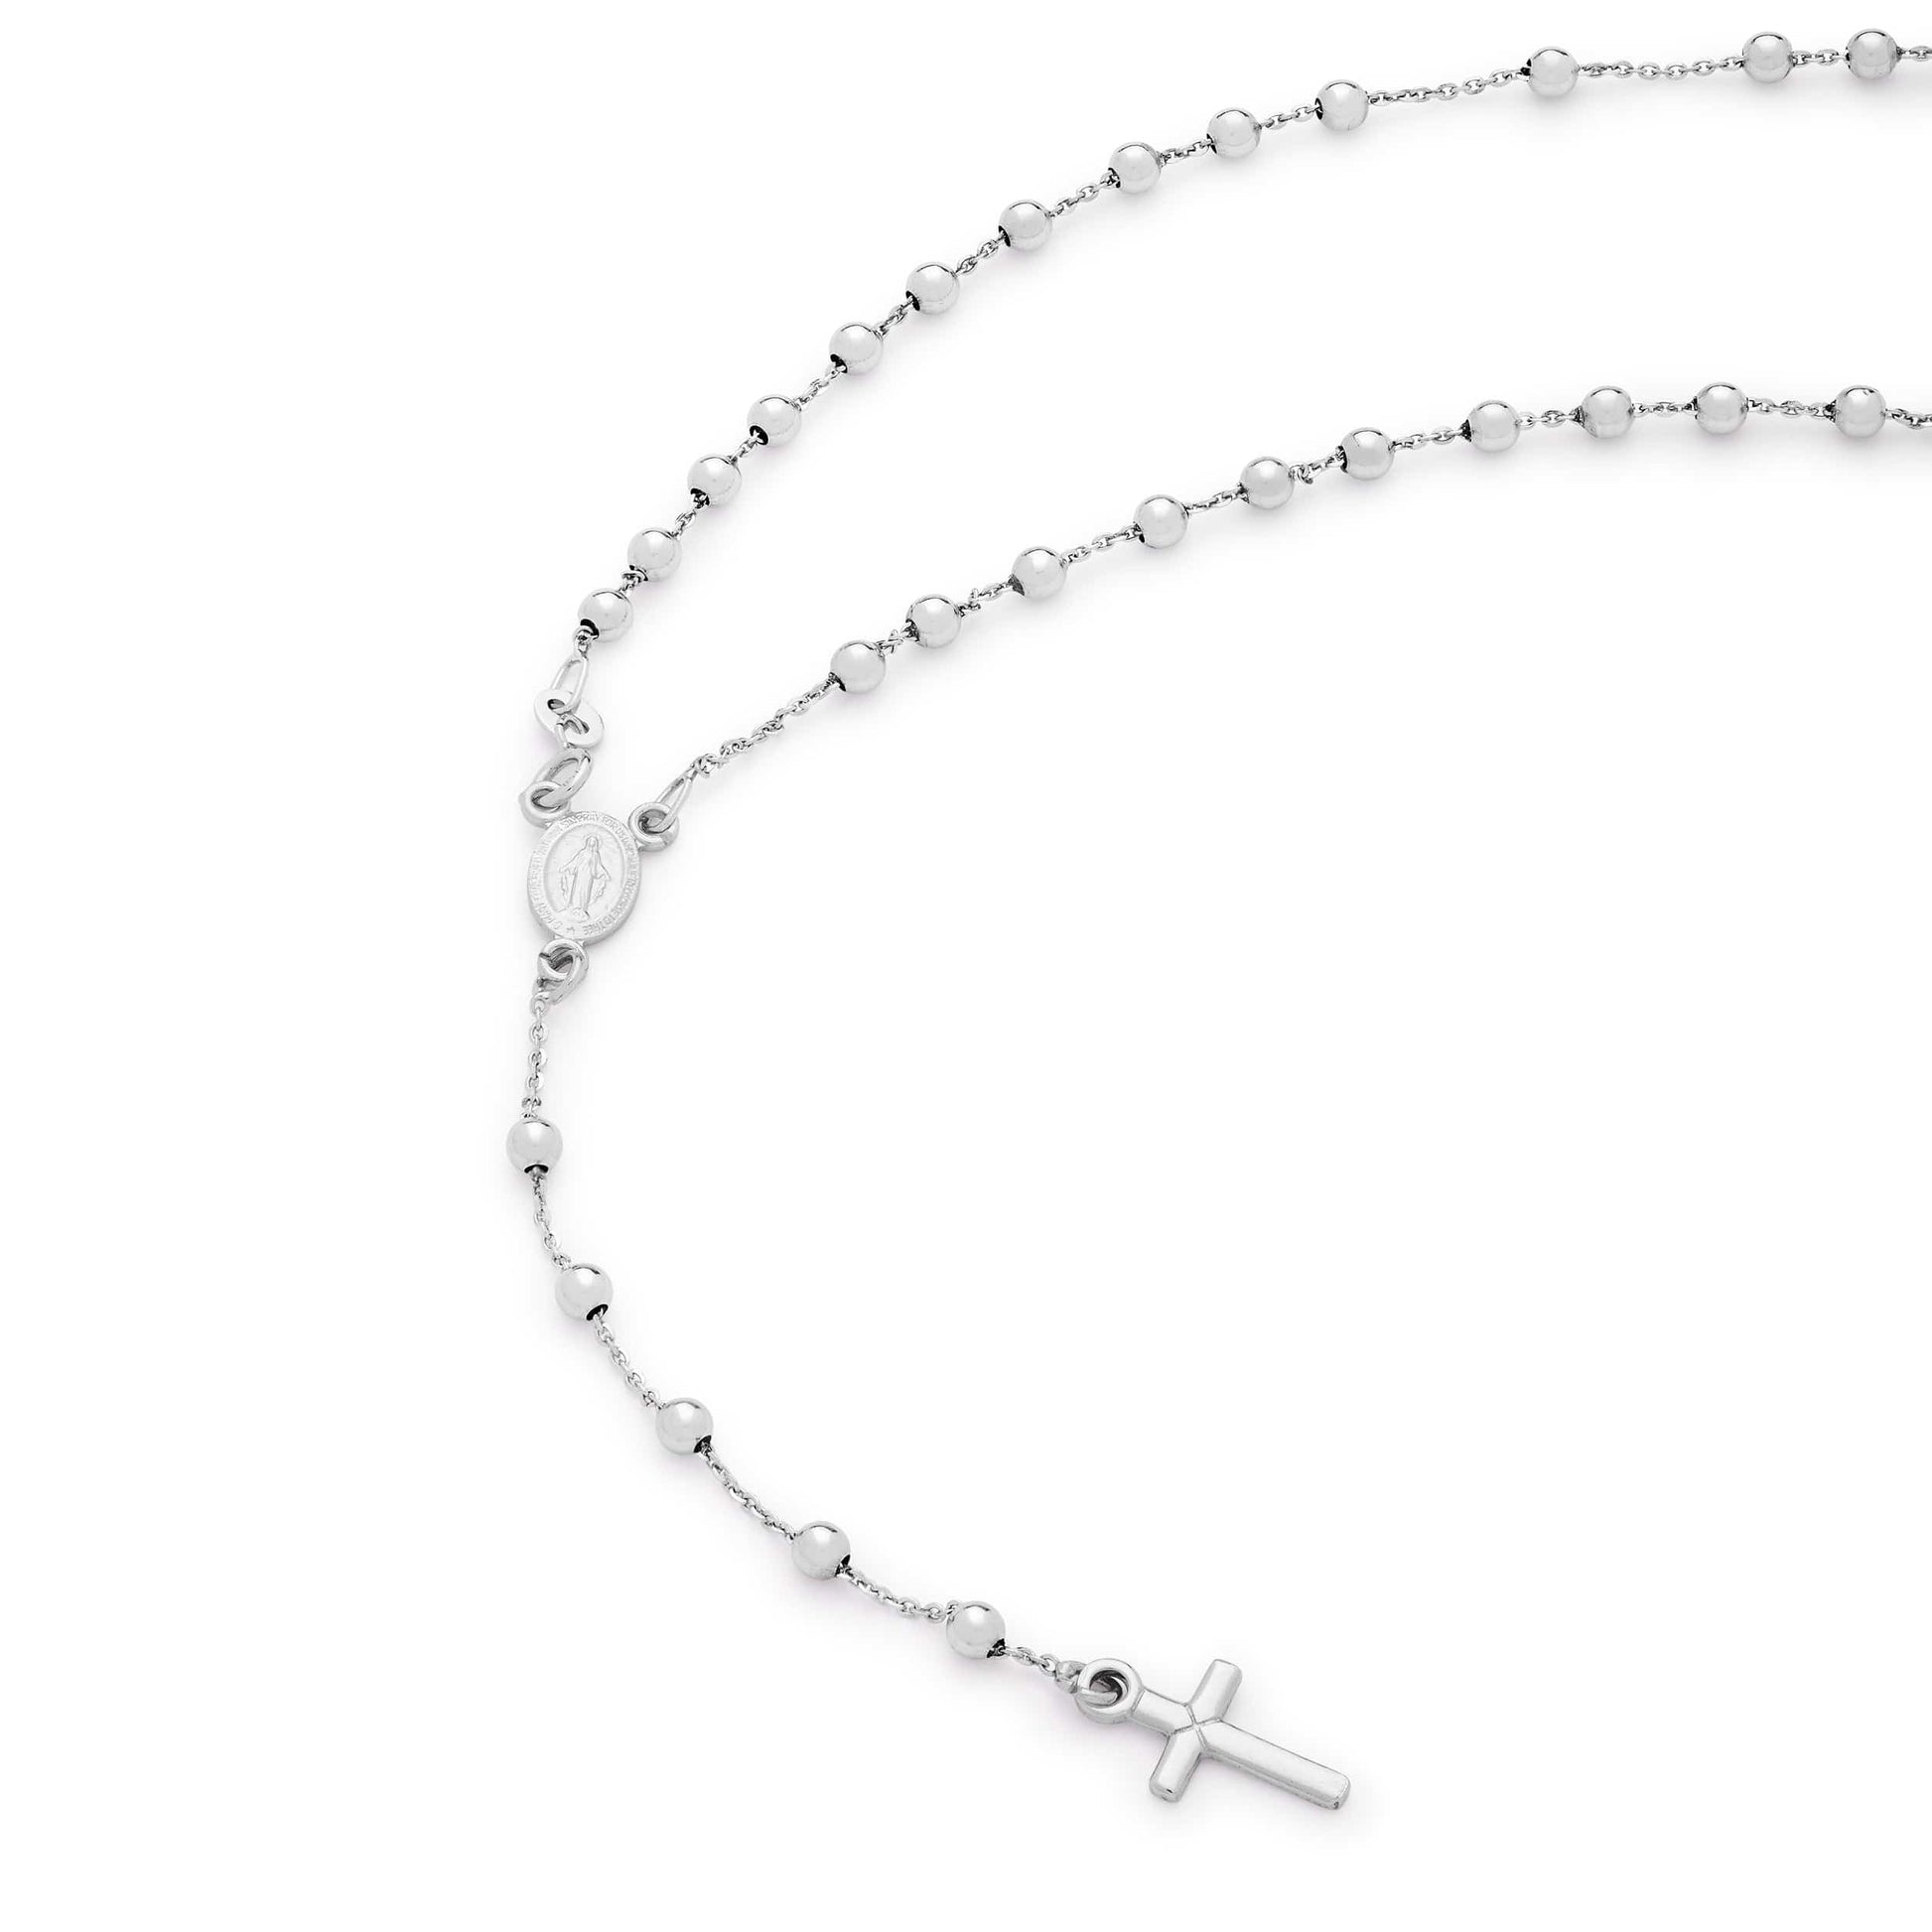 MONDO CATTOLICO Prayer Beads 30.5 cm (12 in) / 3 mm (0.11 in) Simple White Gold Rosary beads